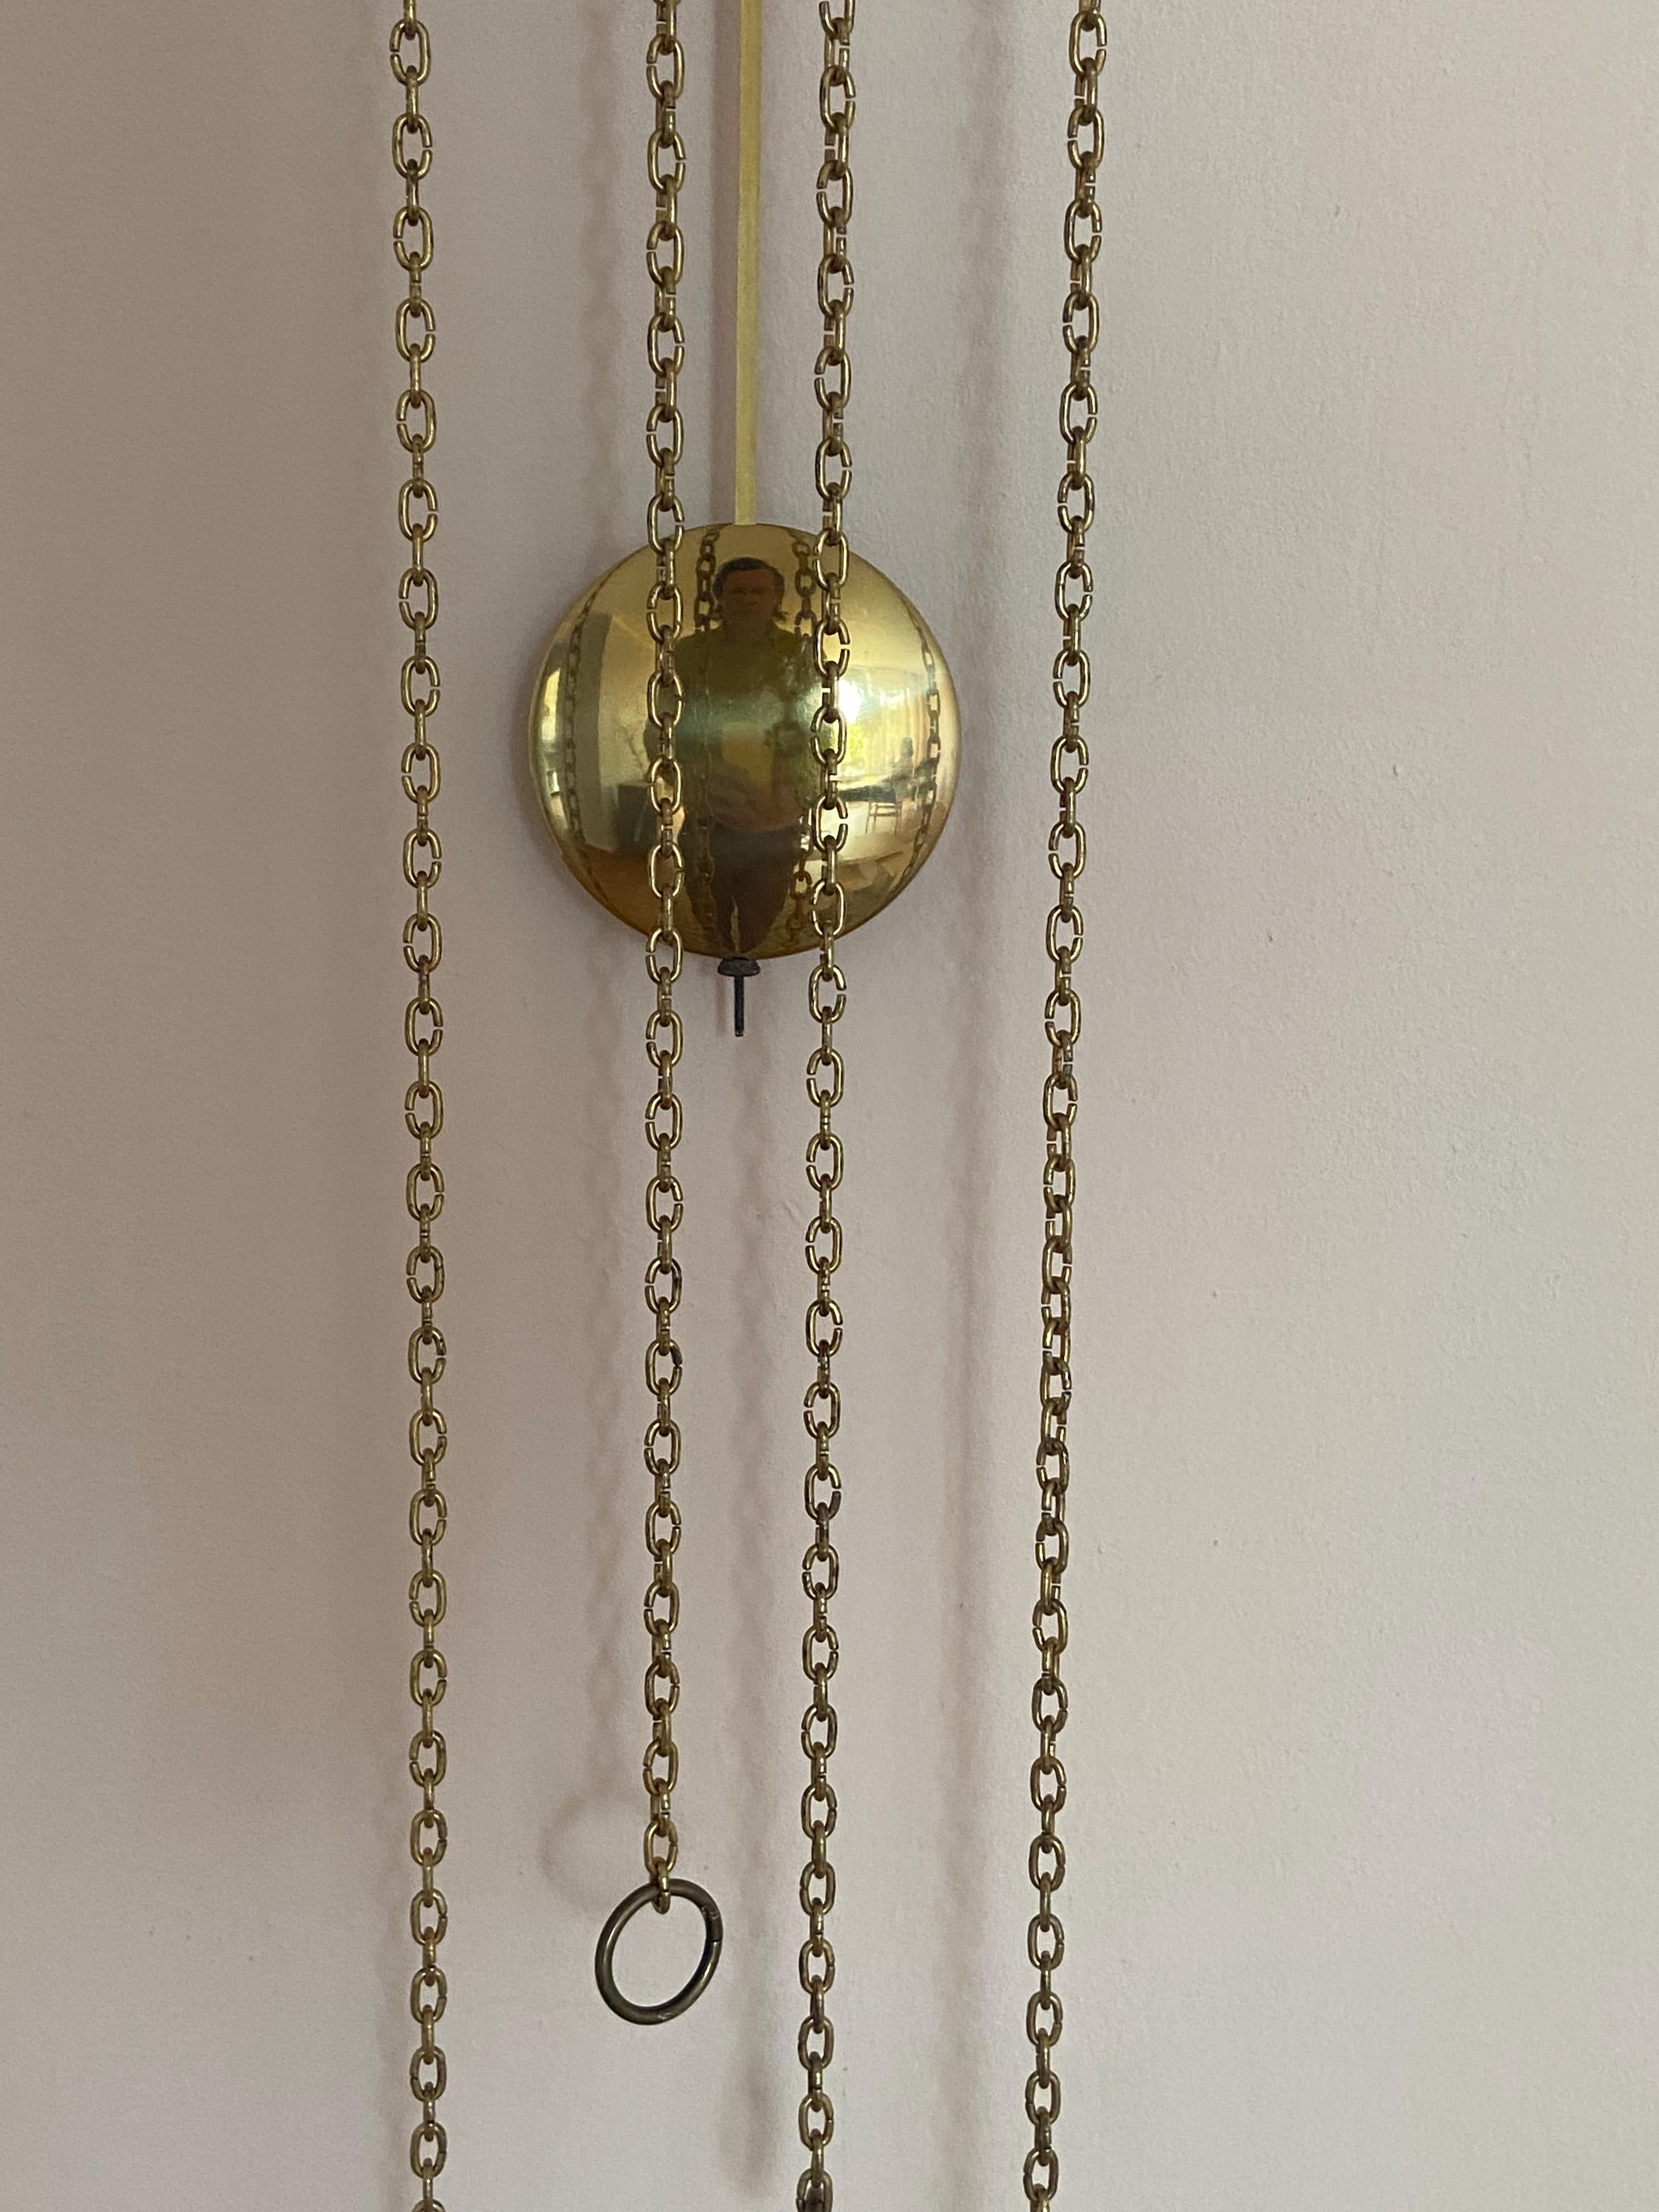 German 1960s Junghans Pendulum + Weights + Gong Wall Clock For Sale 4